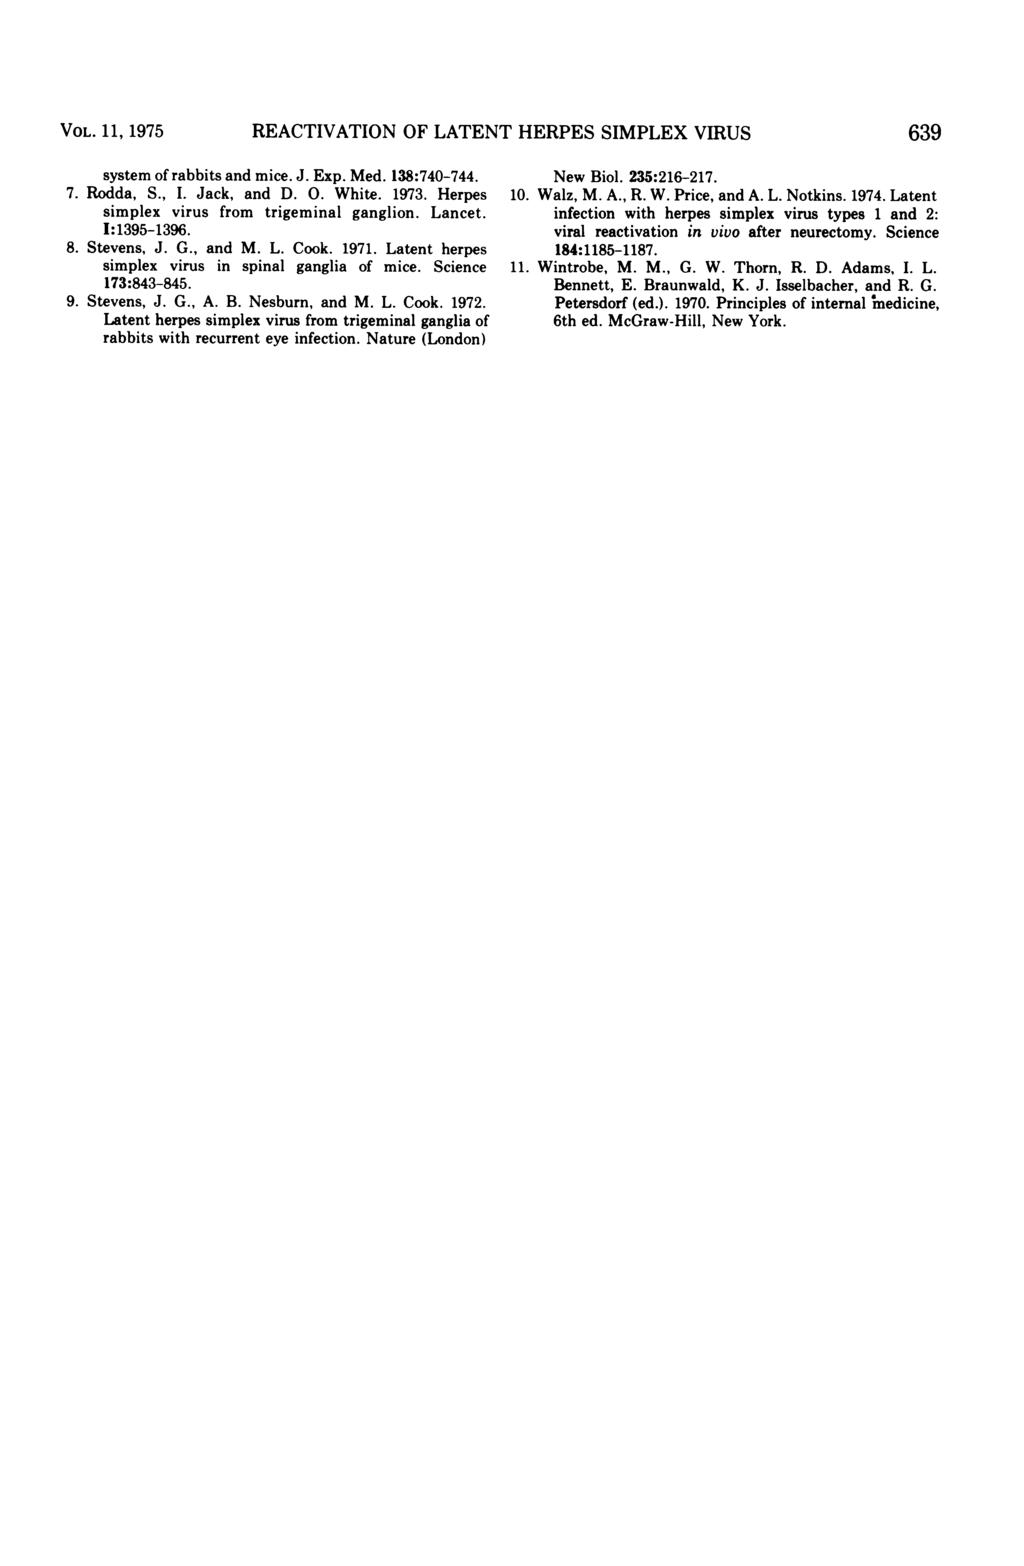 VOL. 11, 1975 REACTIVATION OF LATENT HERPES SIMPLEX VIRUS 639 system of rabbits and mice. J. Exp. Med. 138:740-744. 7. Rodda, S., I. Jack, and D. 0. White. 1973.